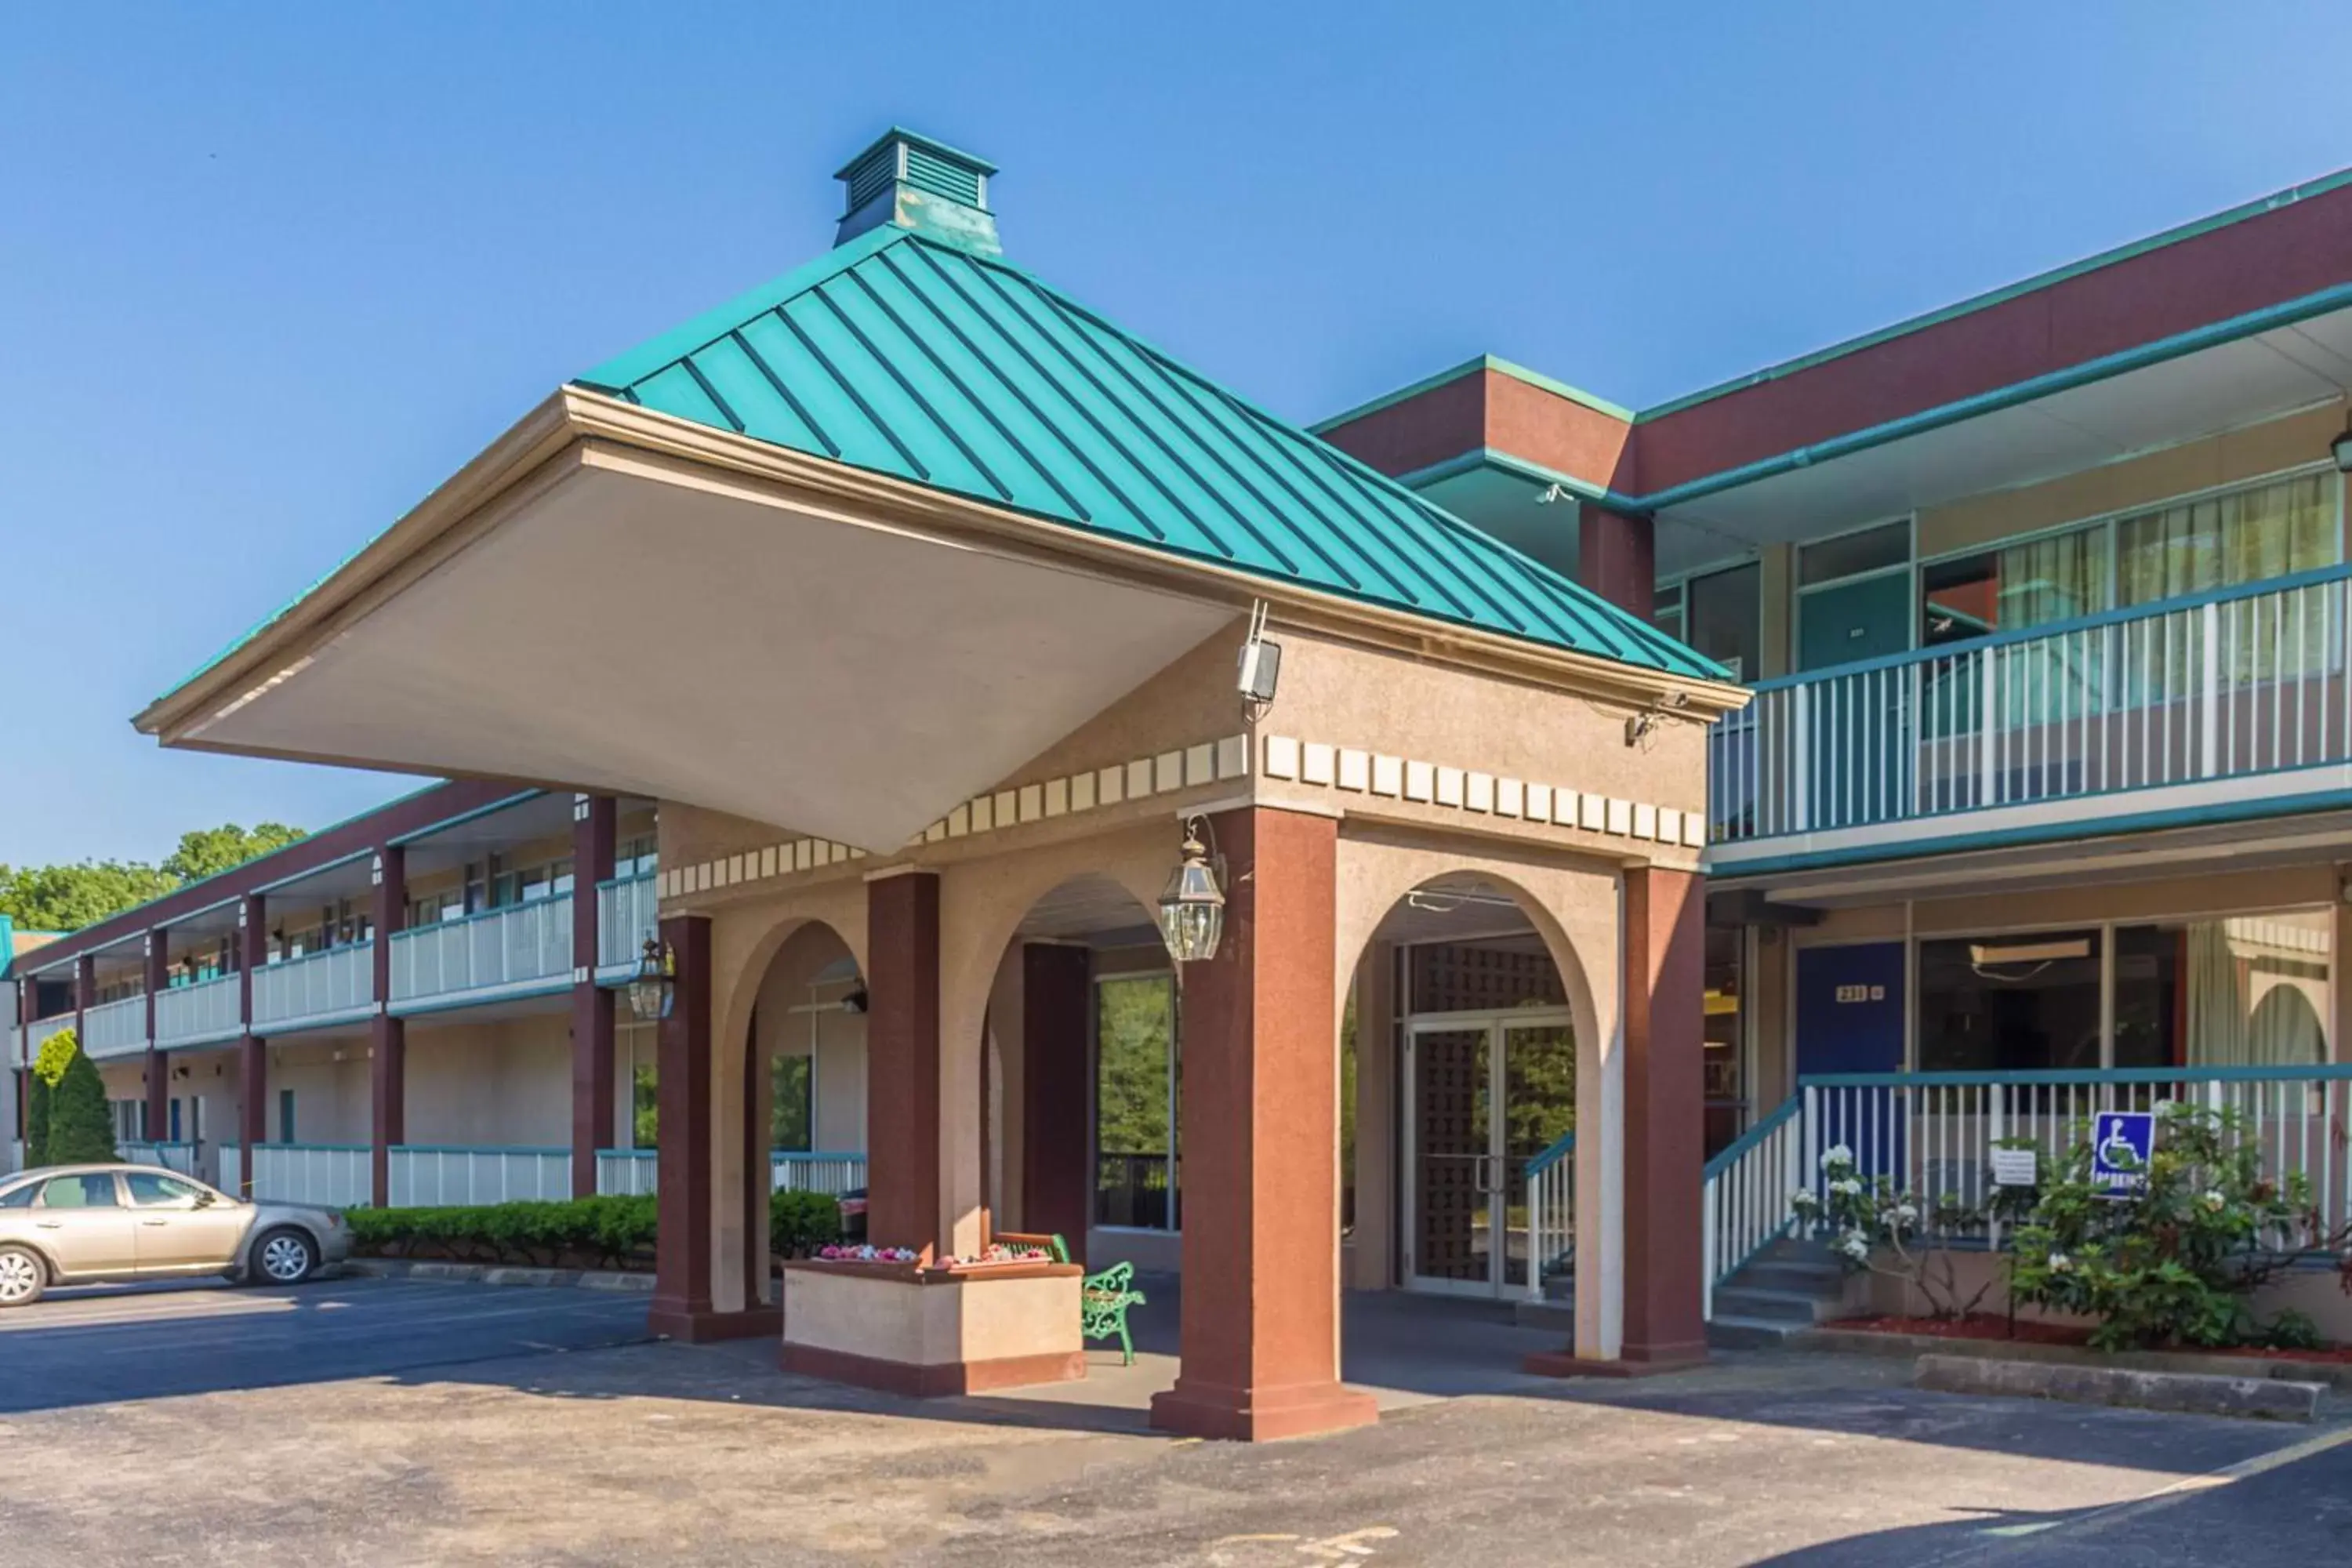 Property building in Motel 6-Groton, CT - Casinos nearby